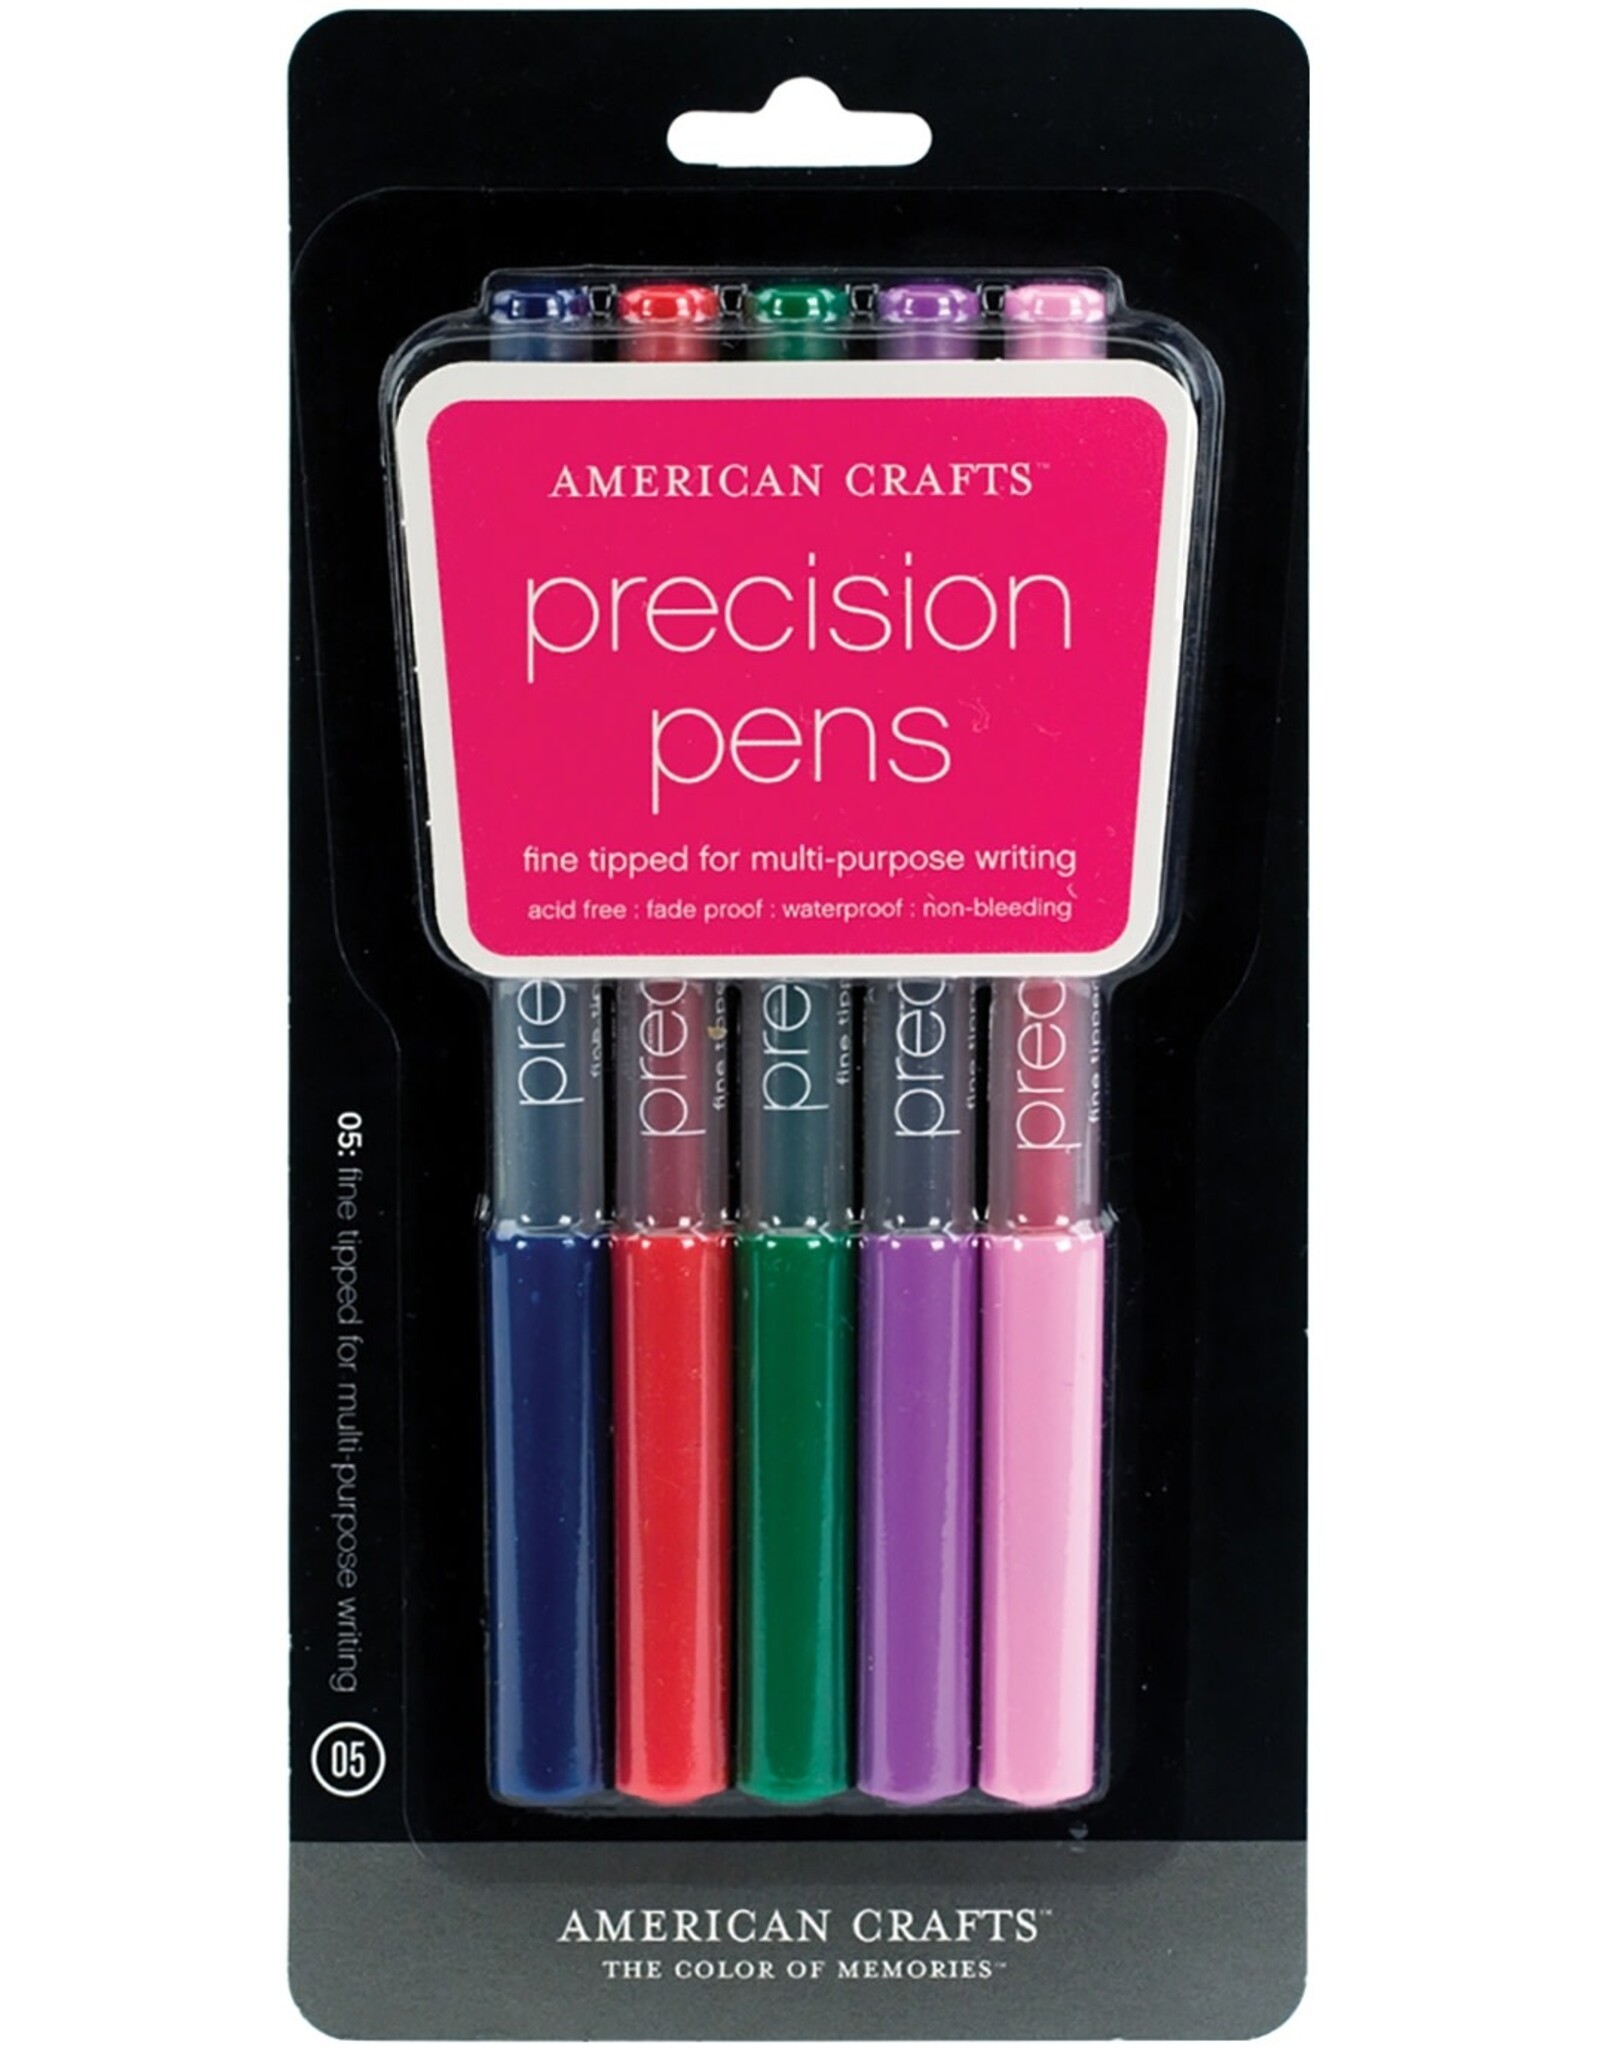 AMERICAN CRAFTS AMERICAN CRAFTS MULTIPACK 05 POINT PRECISION PENS SET